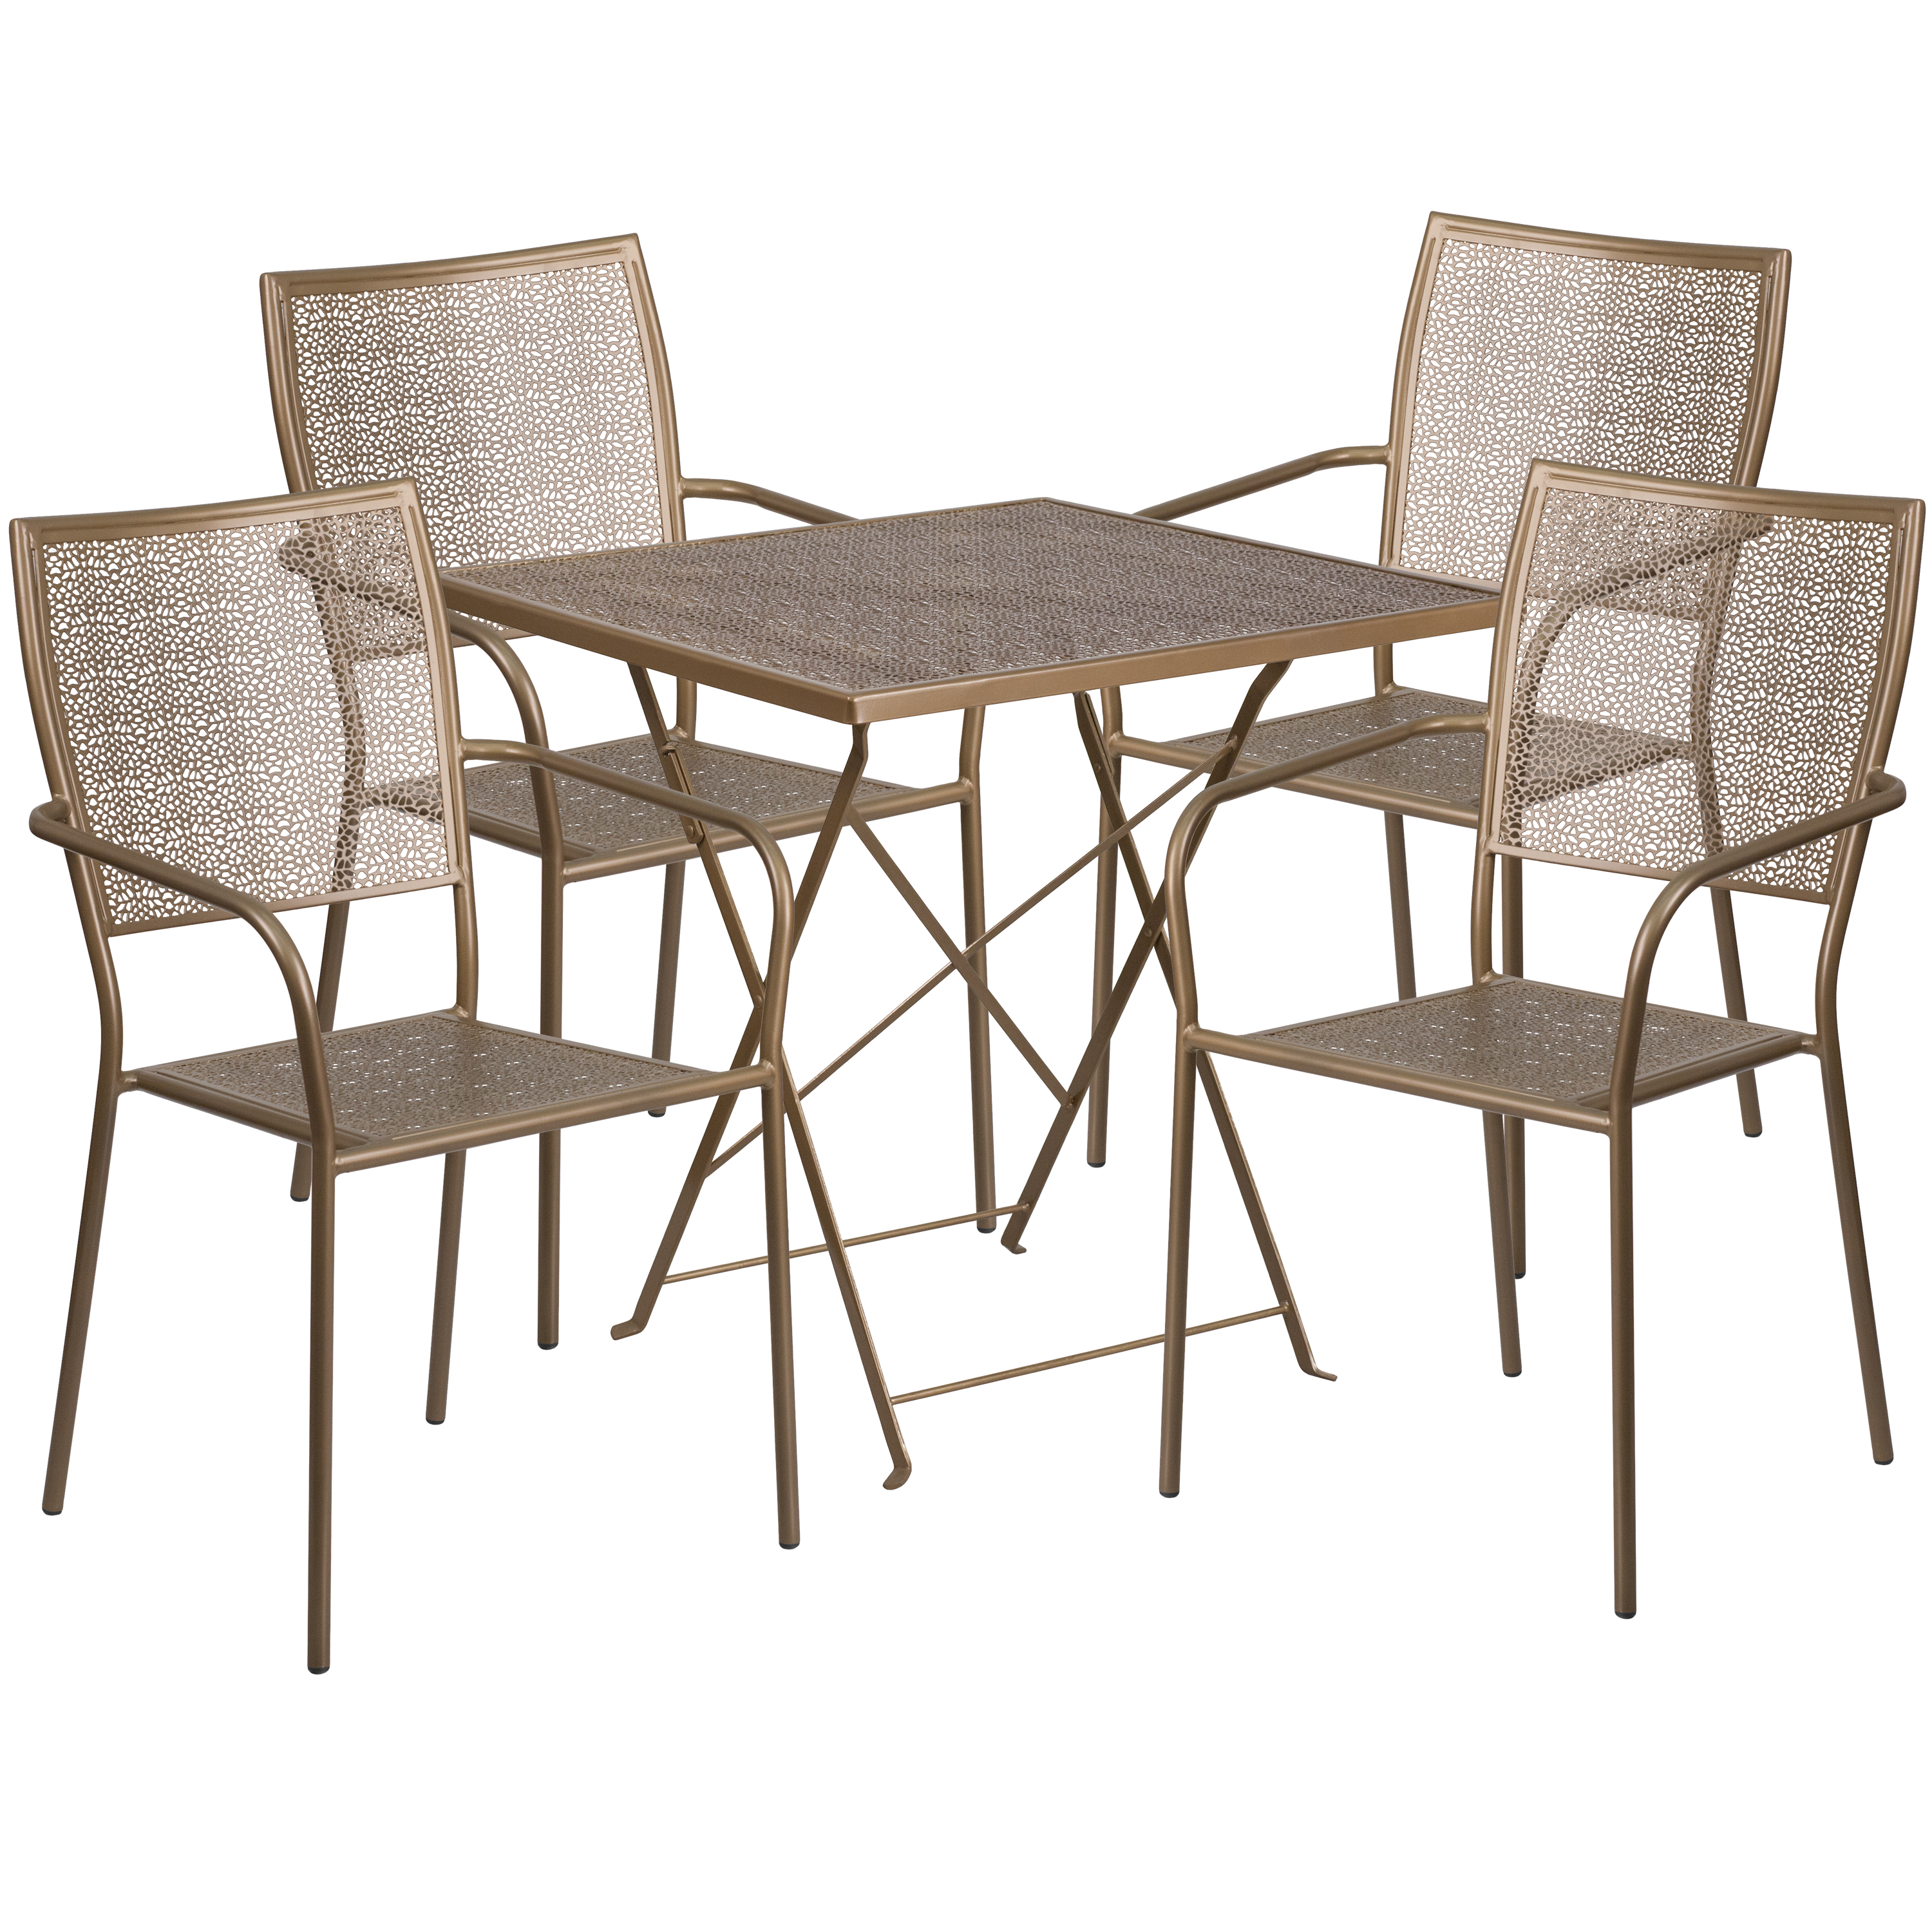 Flash Furniture Commercial Grade 28" Square Gold Indoor-Outdoor Steel Folding Patio Table Set with 4 Square Back Chairs - image 2 of 5